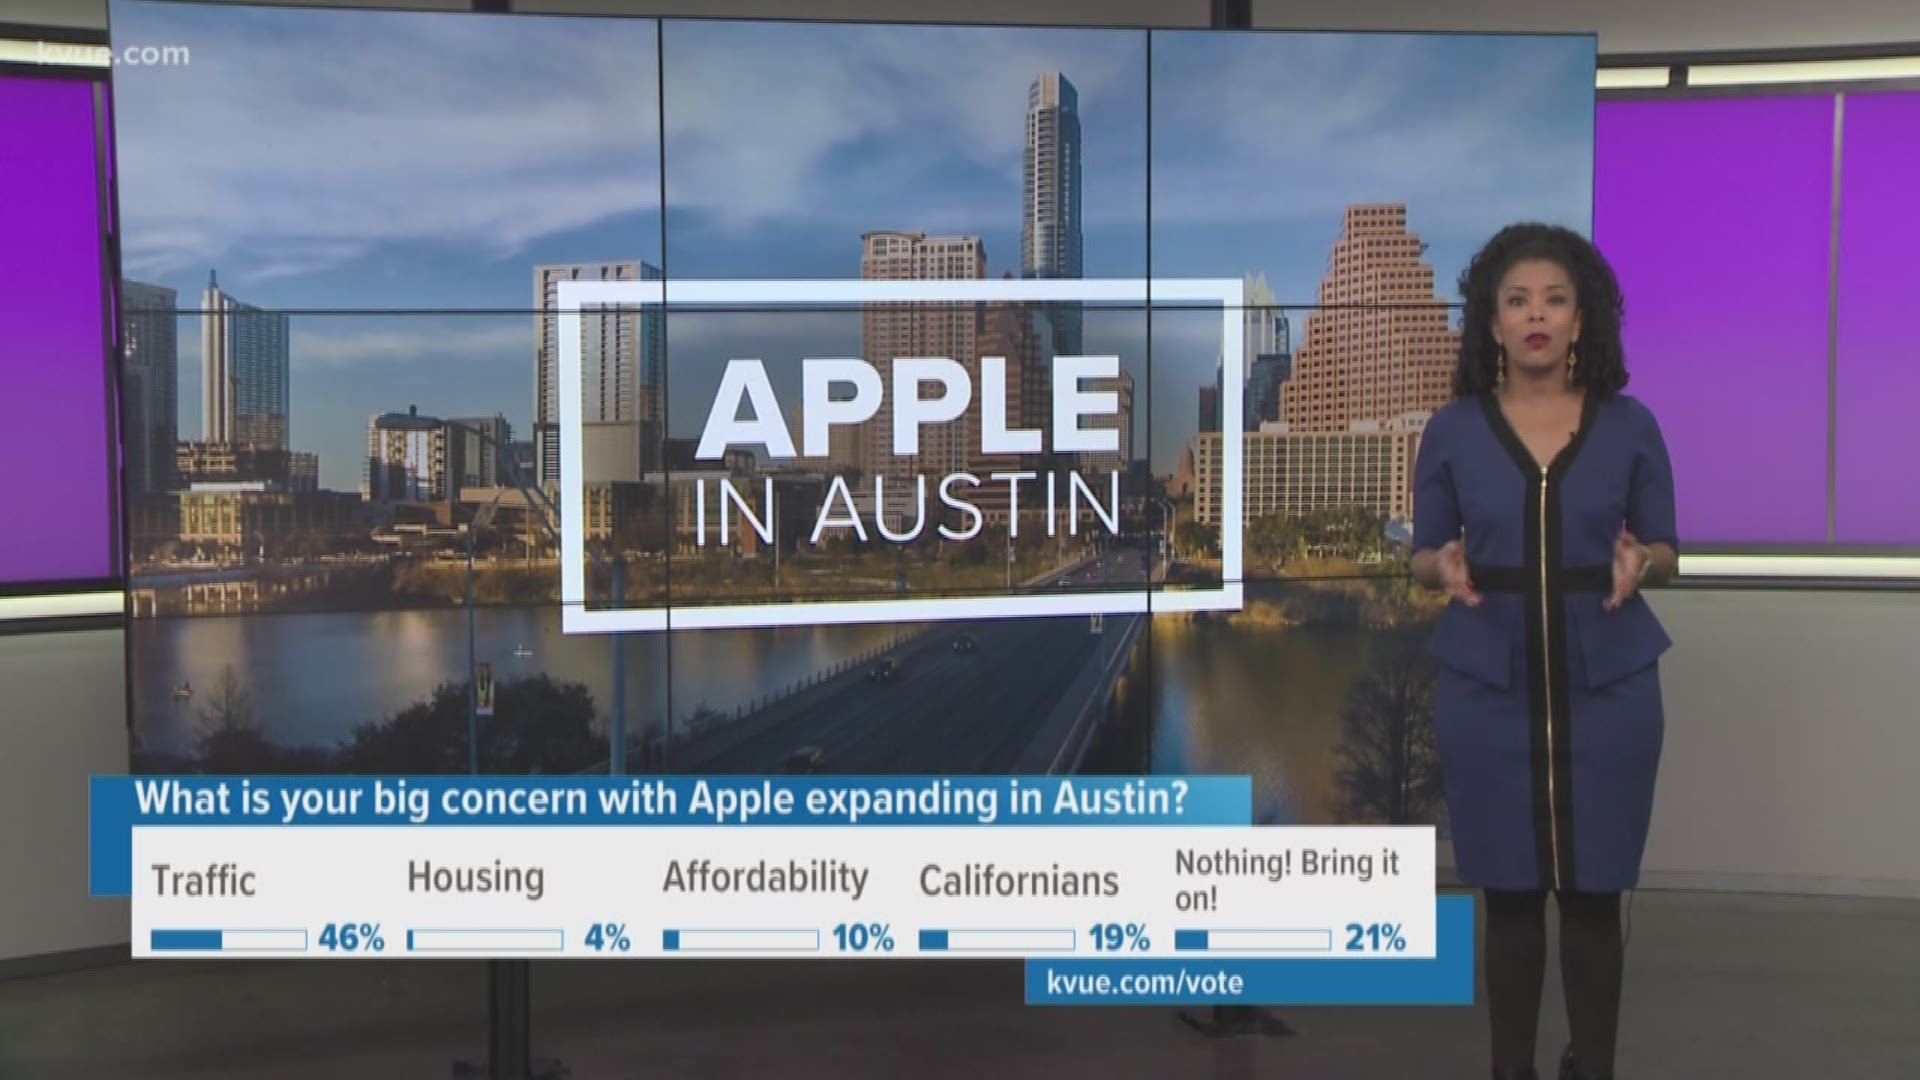 There are neighbors who are excited about their property values with the new Apple expansion in Austin. But do we have enough housing to support all the new jobs?